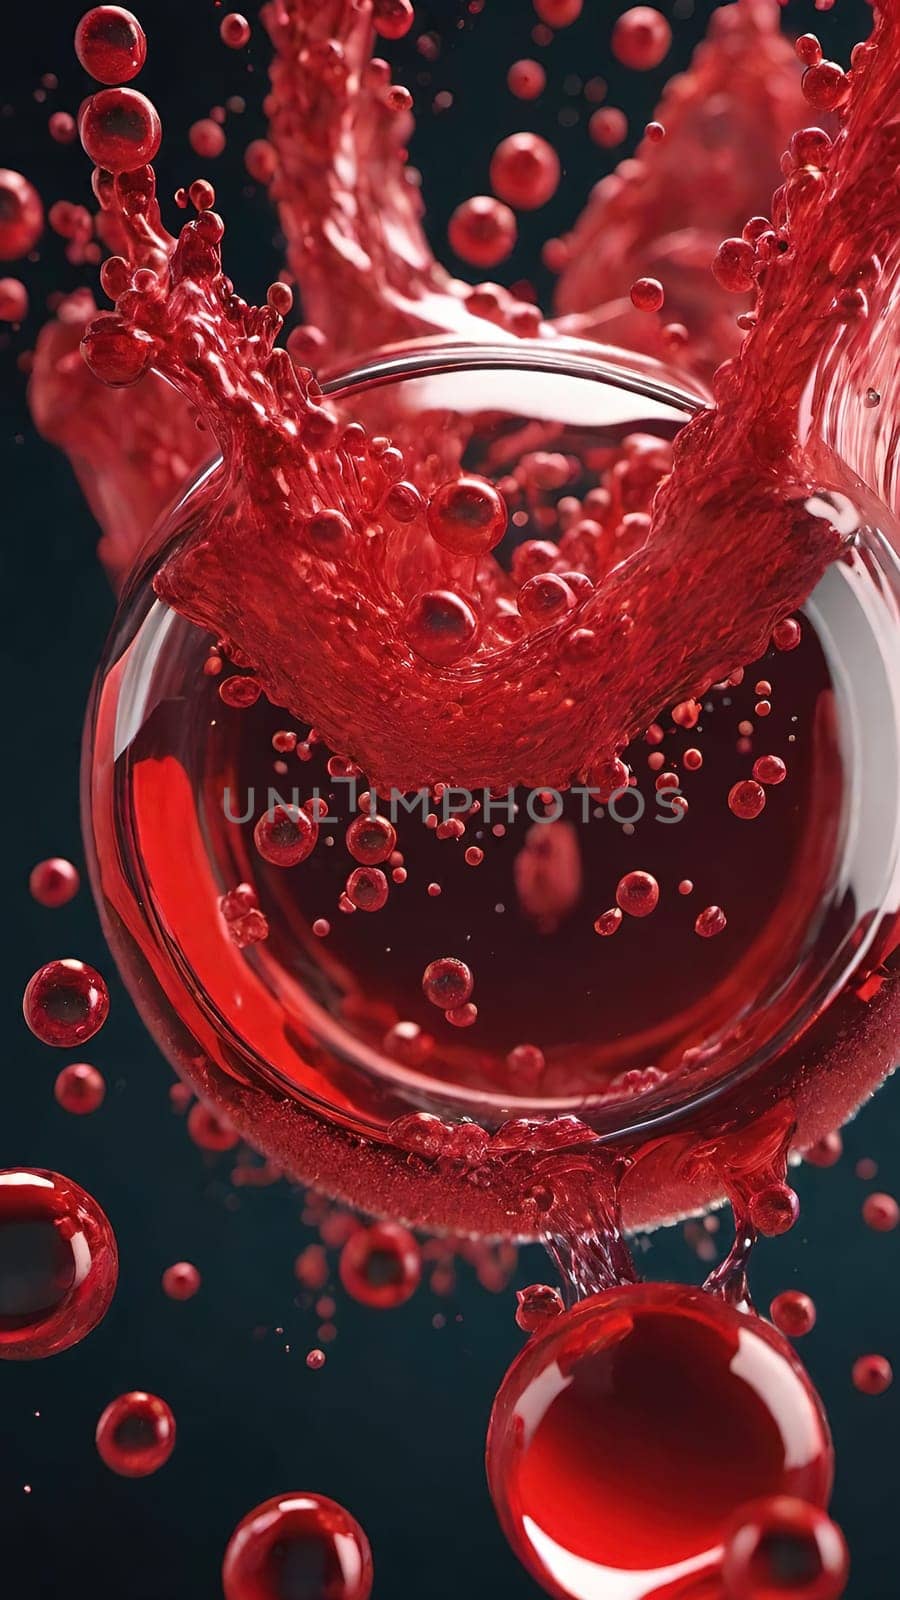 Splash isolated on background. 3D rendered illustration.close up of water drops on background with copy space for text.water splash with bubbles on background. 3D illustration.Abstract background with bubbles in water.